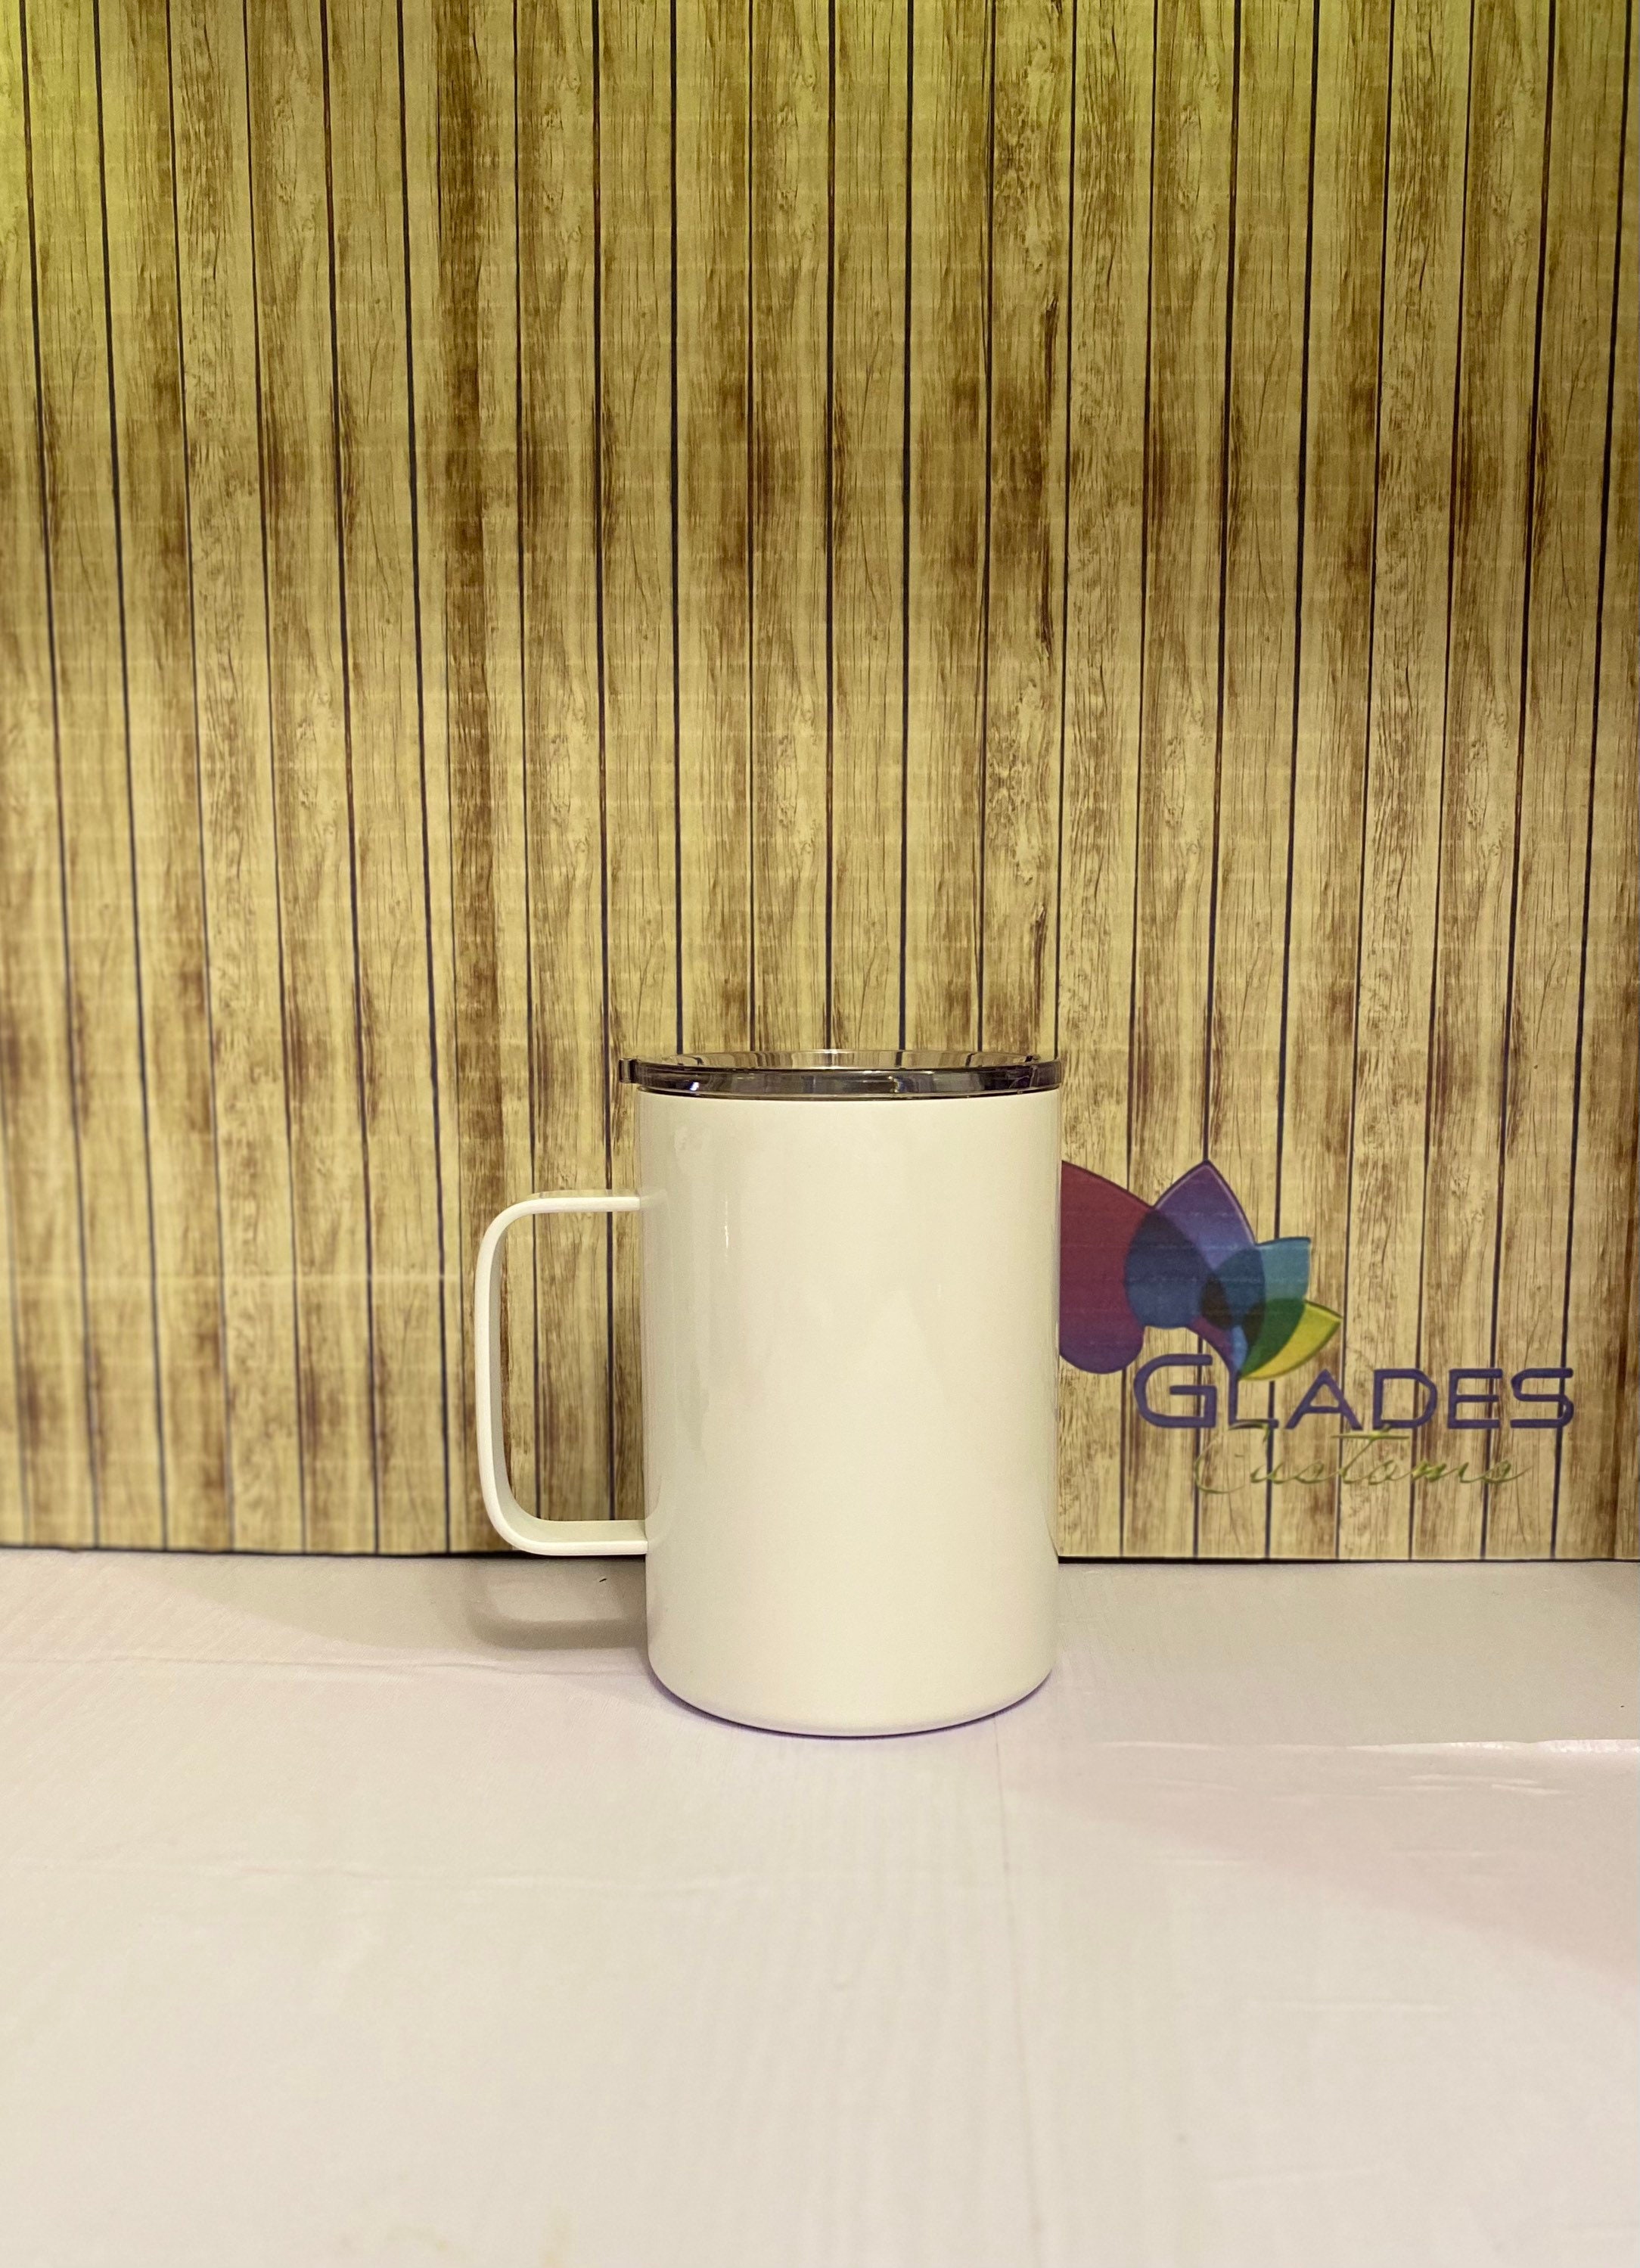 Stainless Steel Sublimation Cup with Straw - 16oz